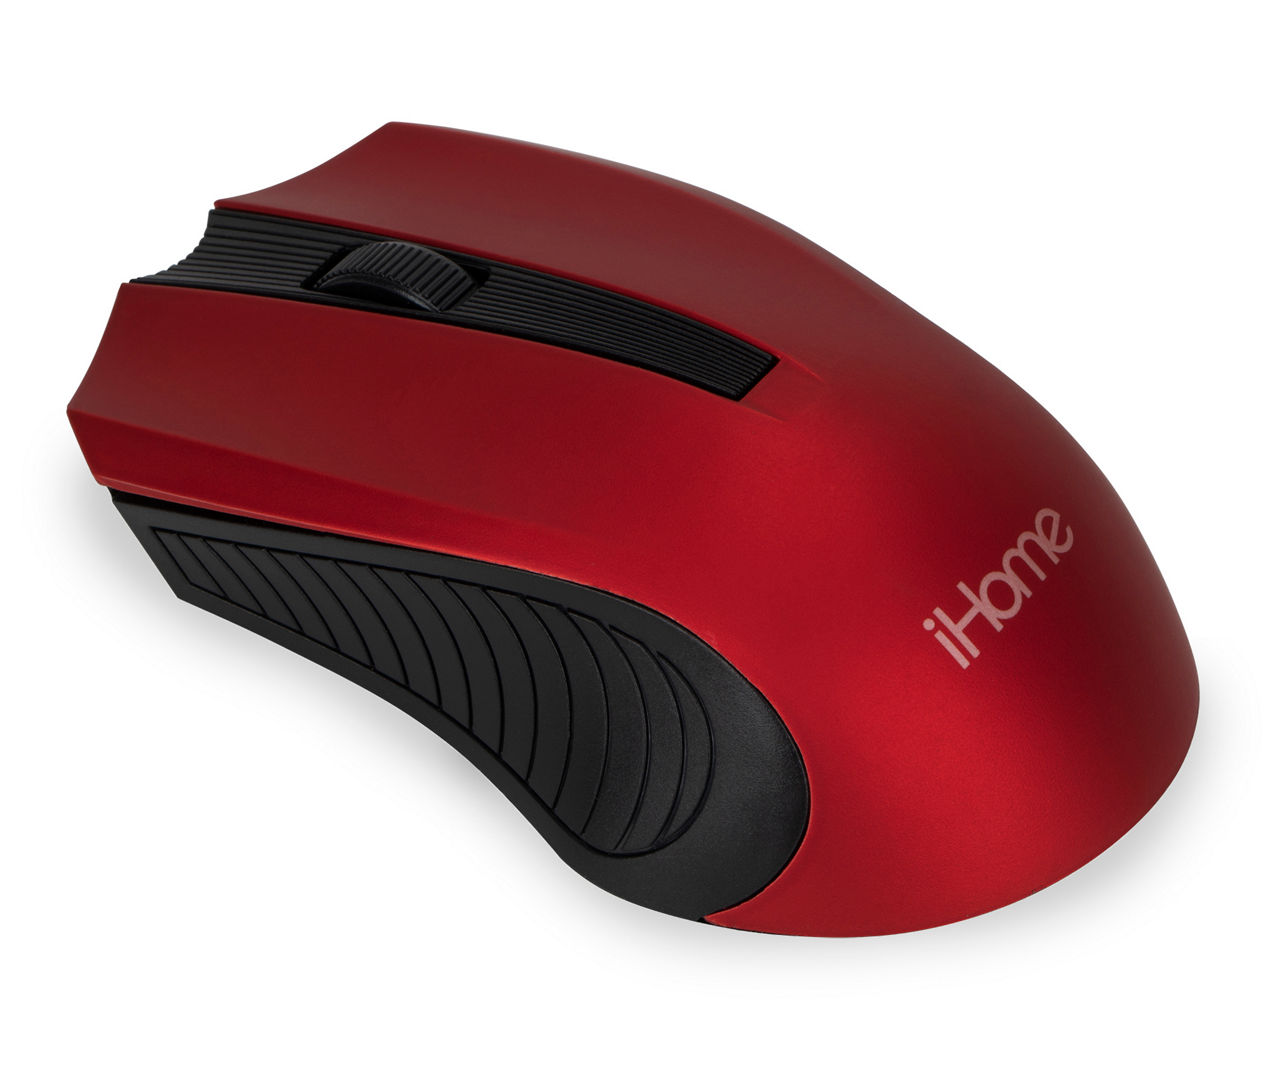 Objector perspektiv Lily iHome Red & Black Wireless Mouse | Big Lots